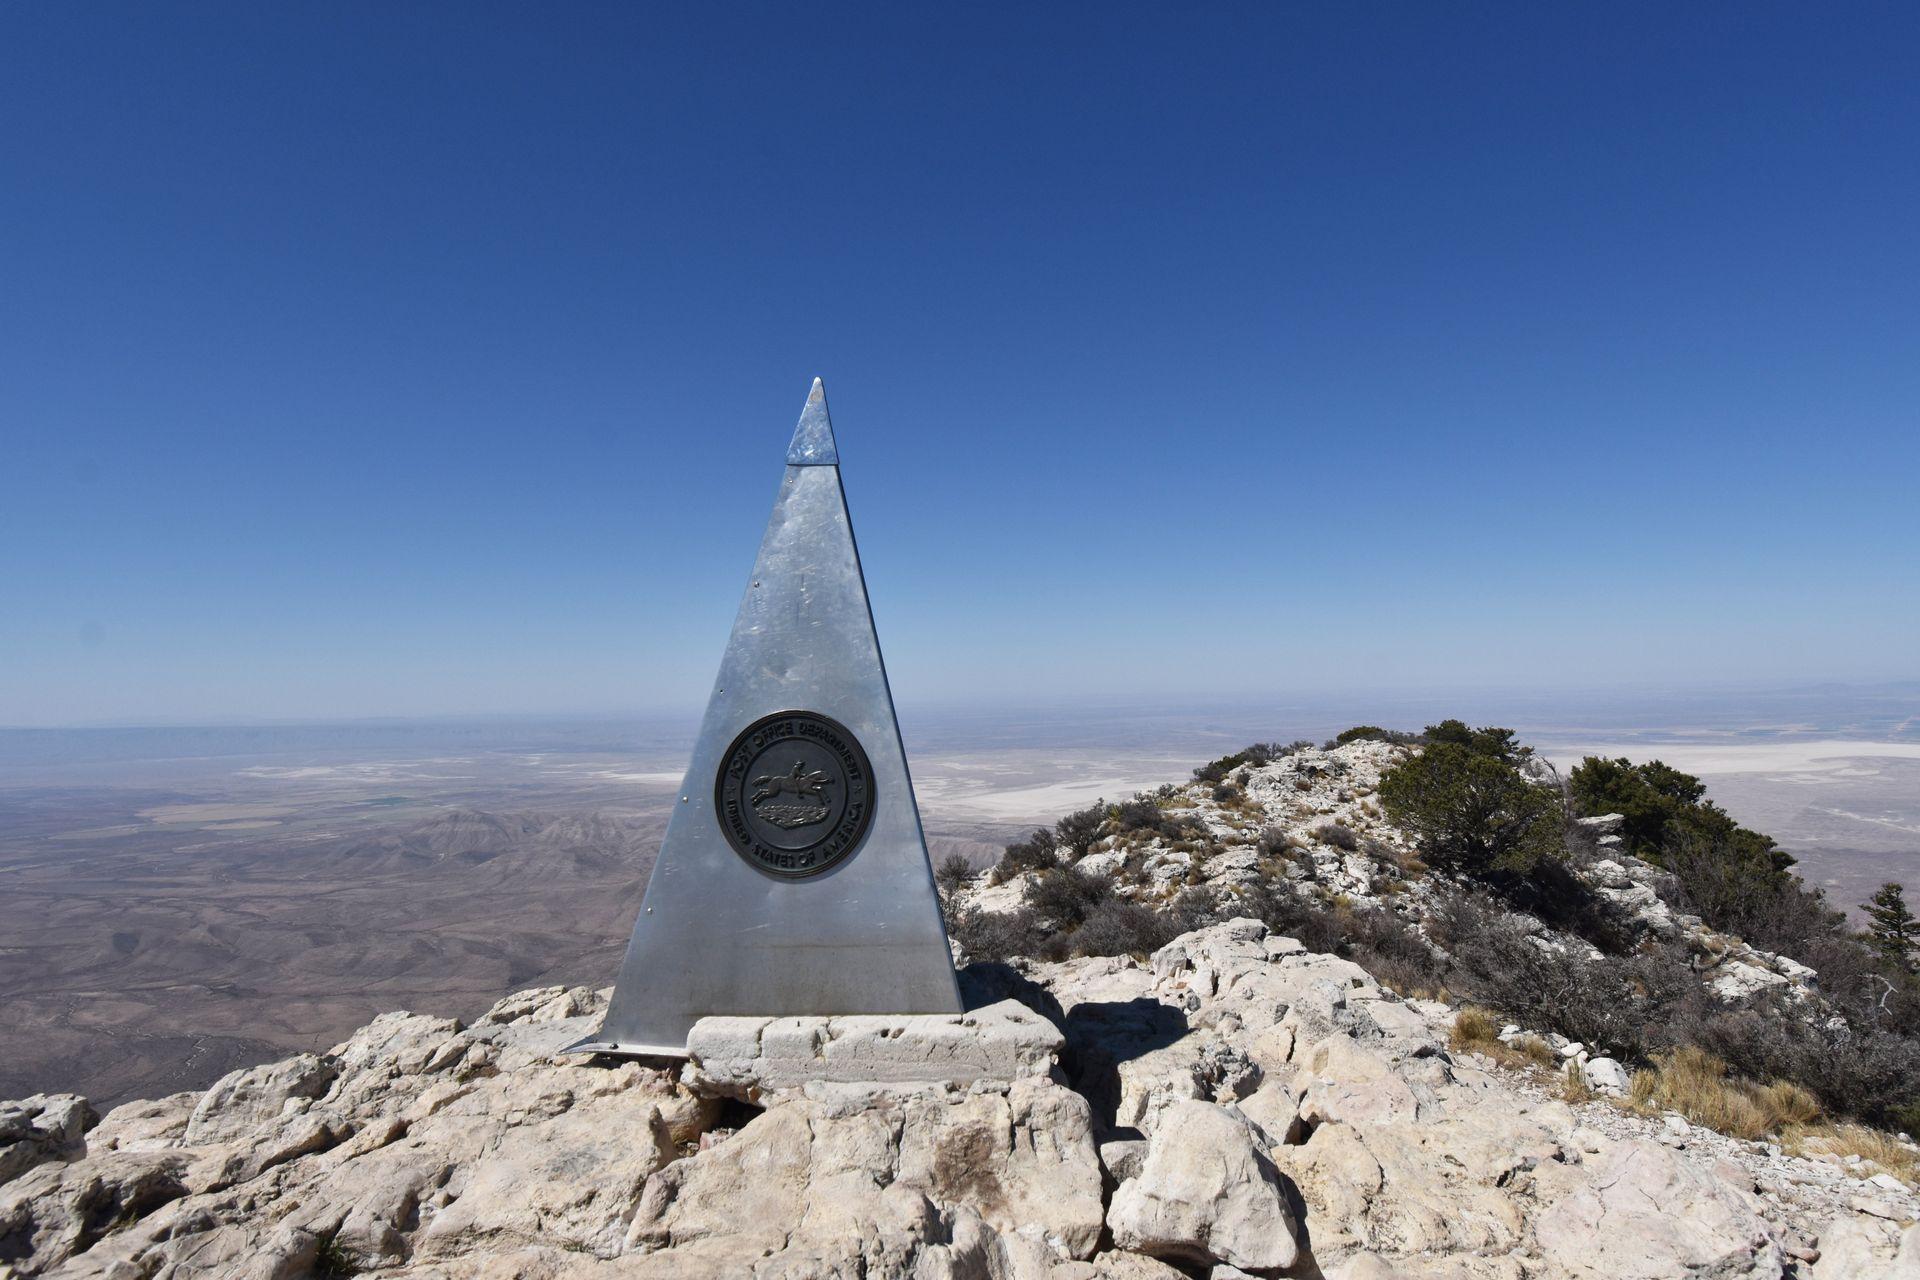 A large metal pyramid on the top of Guadalupe Peak at Guadalupe Mountains National Park.